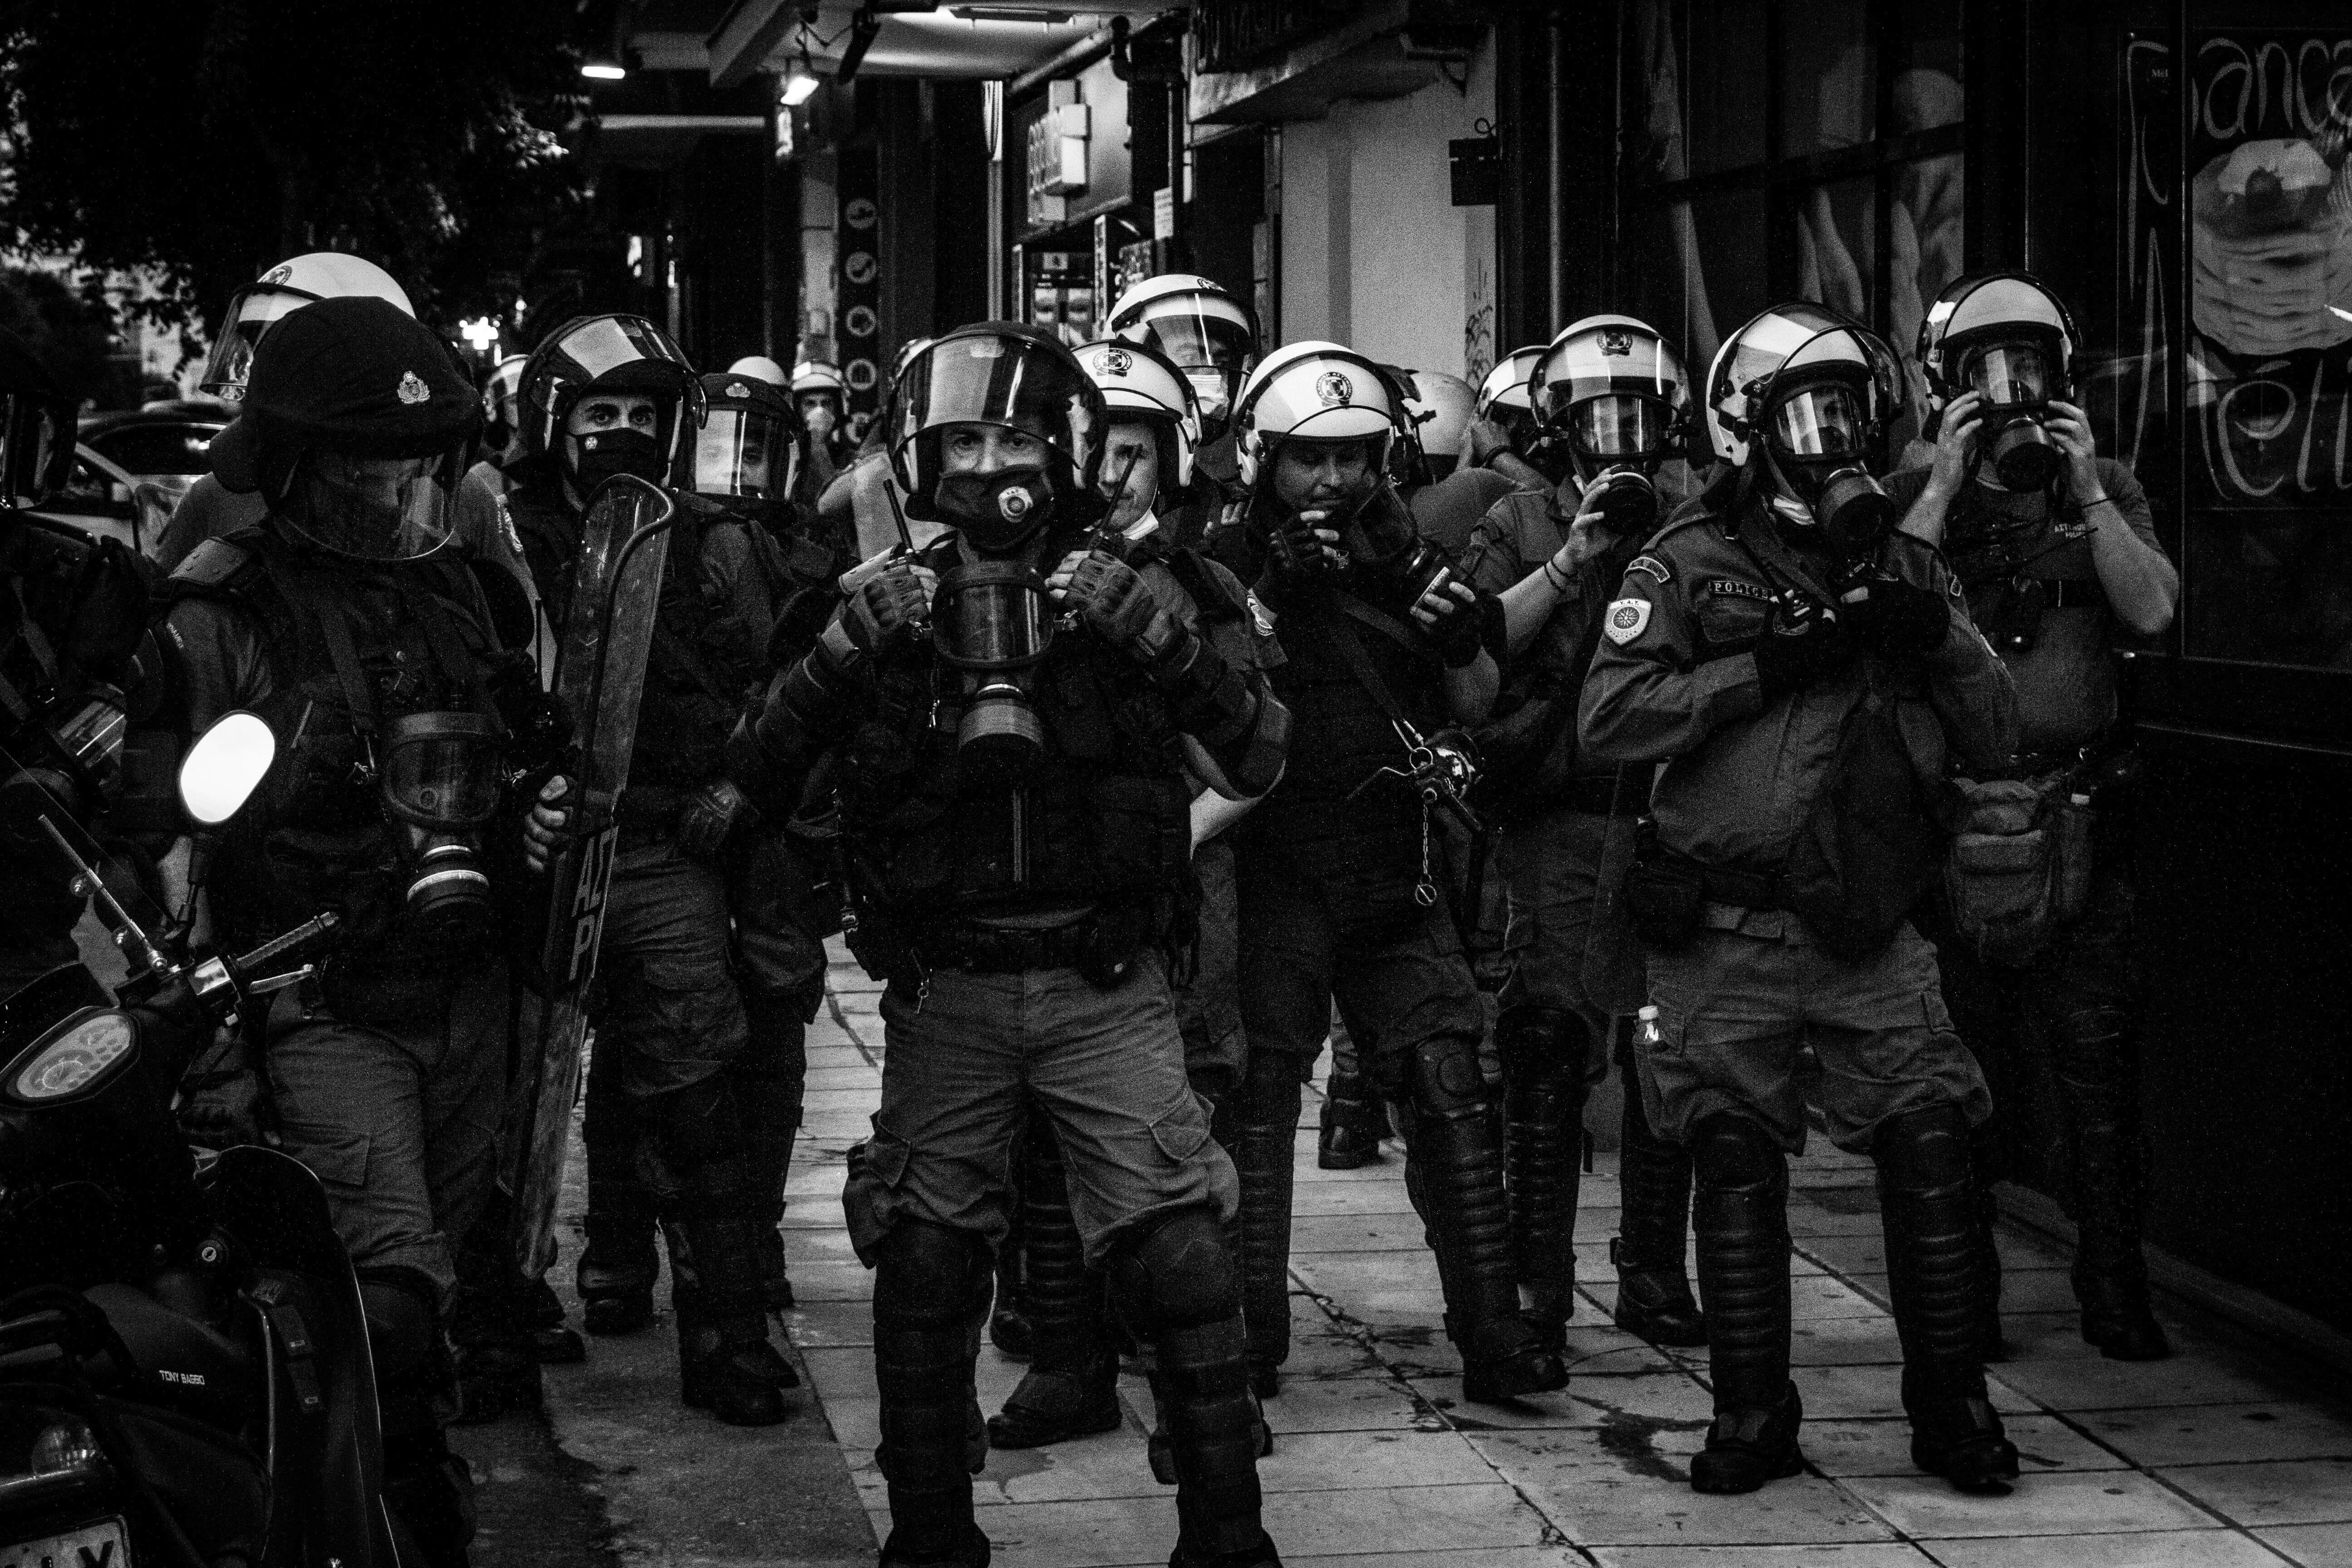 Teacher Dude riot police were out in force again tonight in the city of Thessaloniki, saving the world from gin and tonic. #ΑΠΘ #Θεσσαλονίκη #Greece #Τζιν